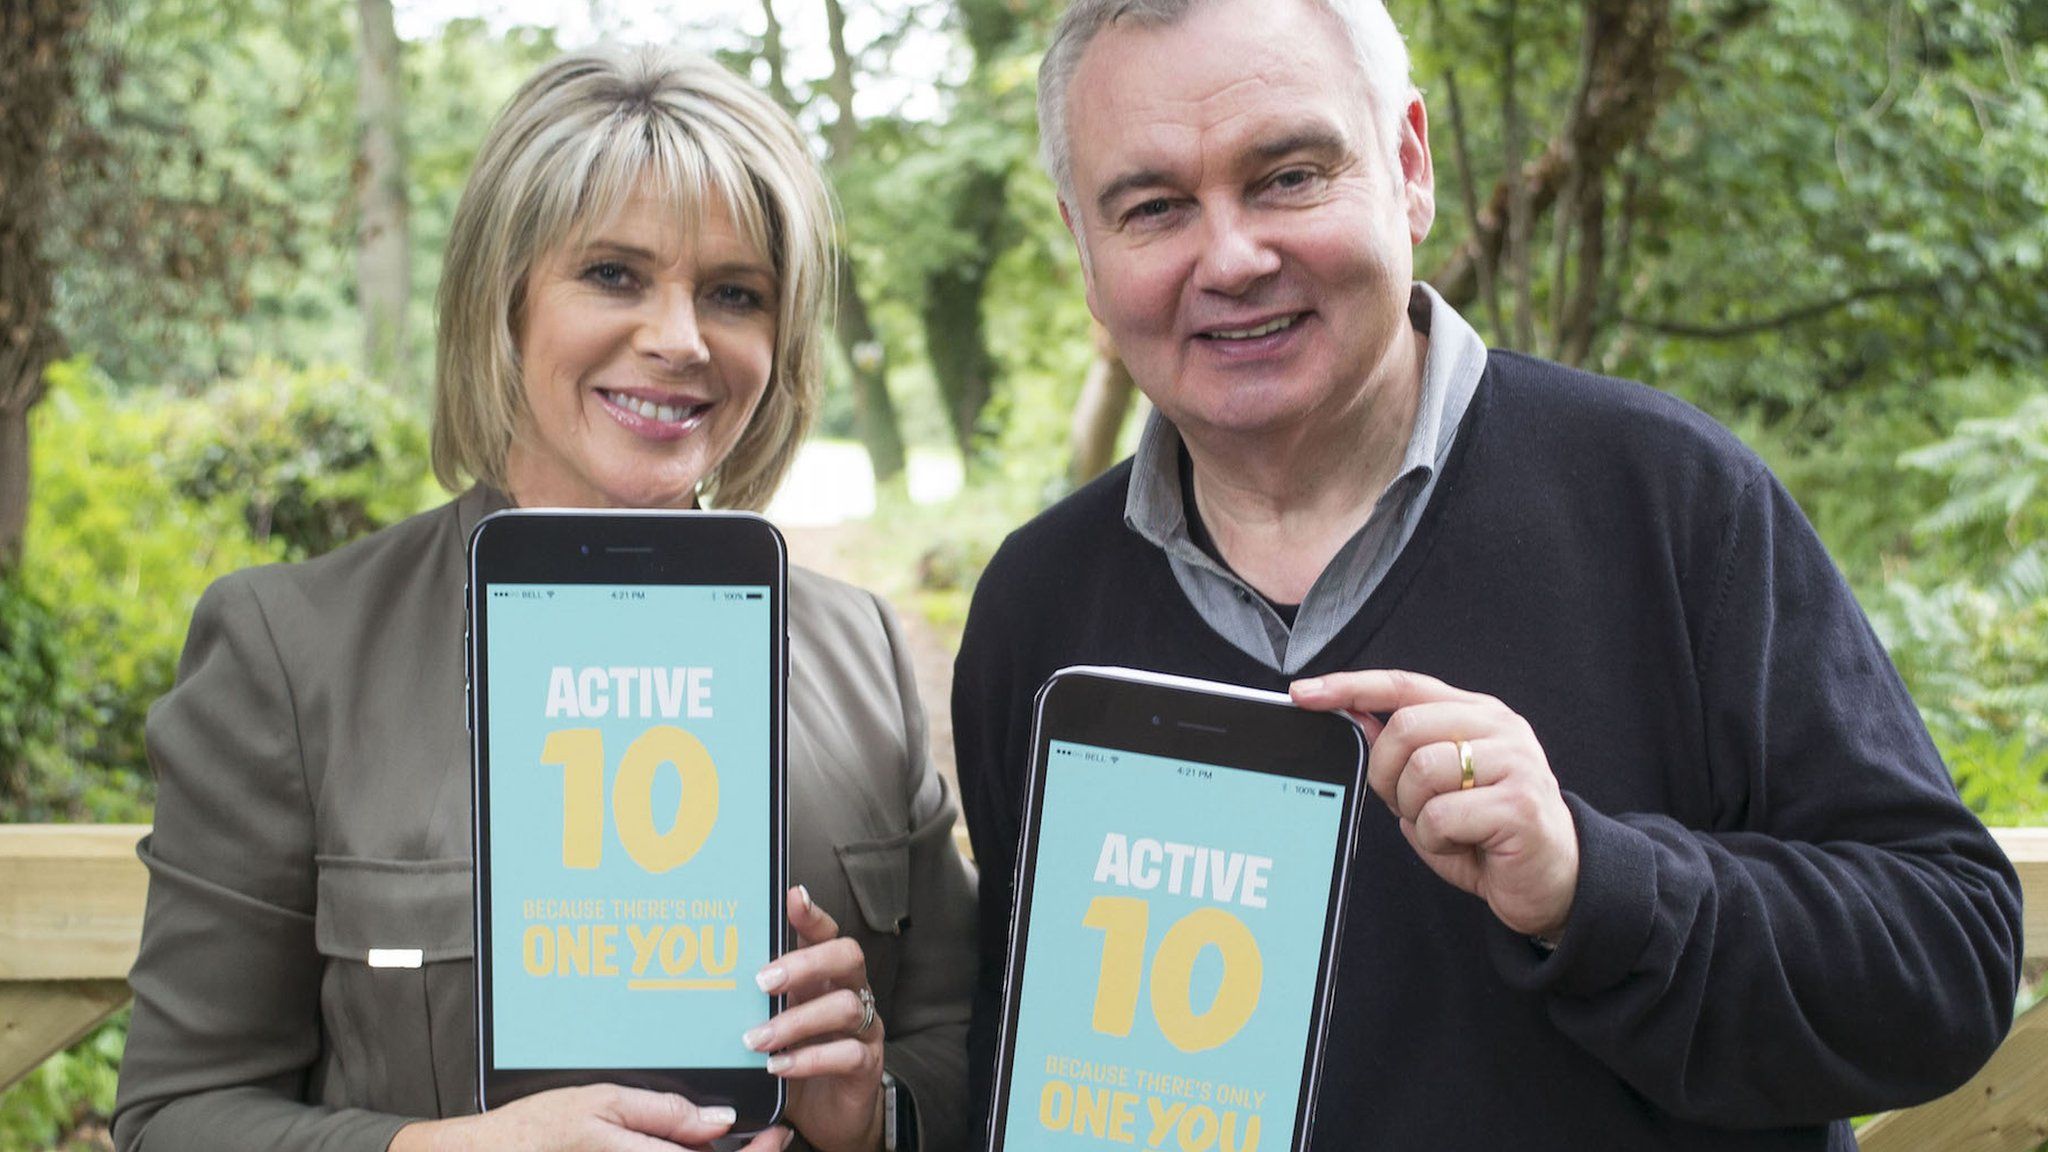 Eamonn Holmes and Ruth Langford hold iphones